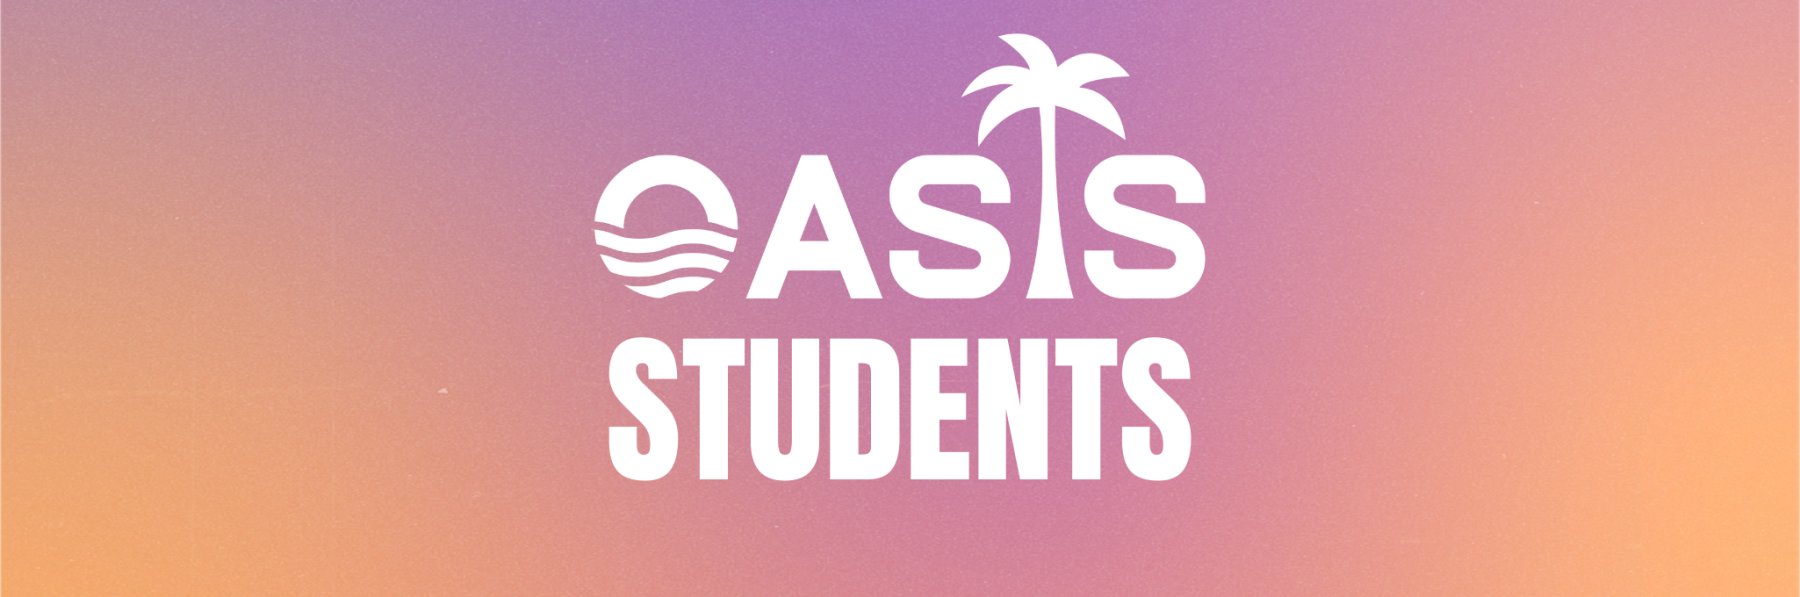 Oasis Students